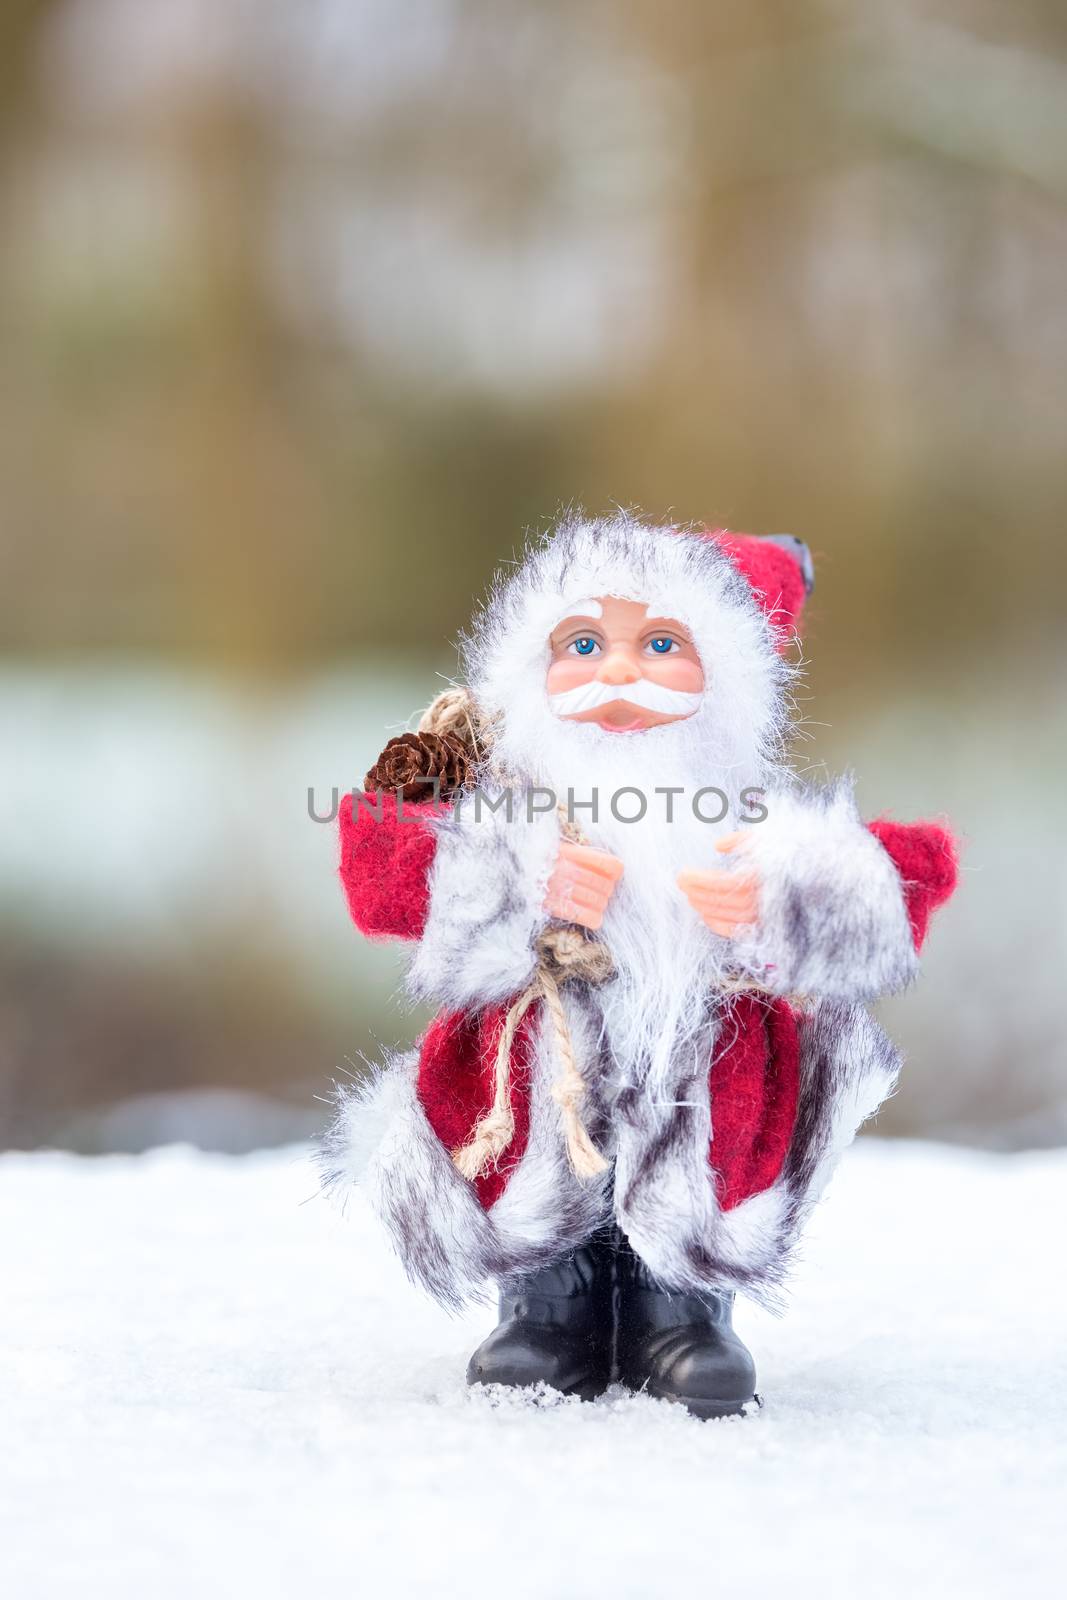 Santa Claus figurine standing in white snow outside